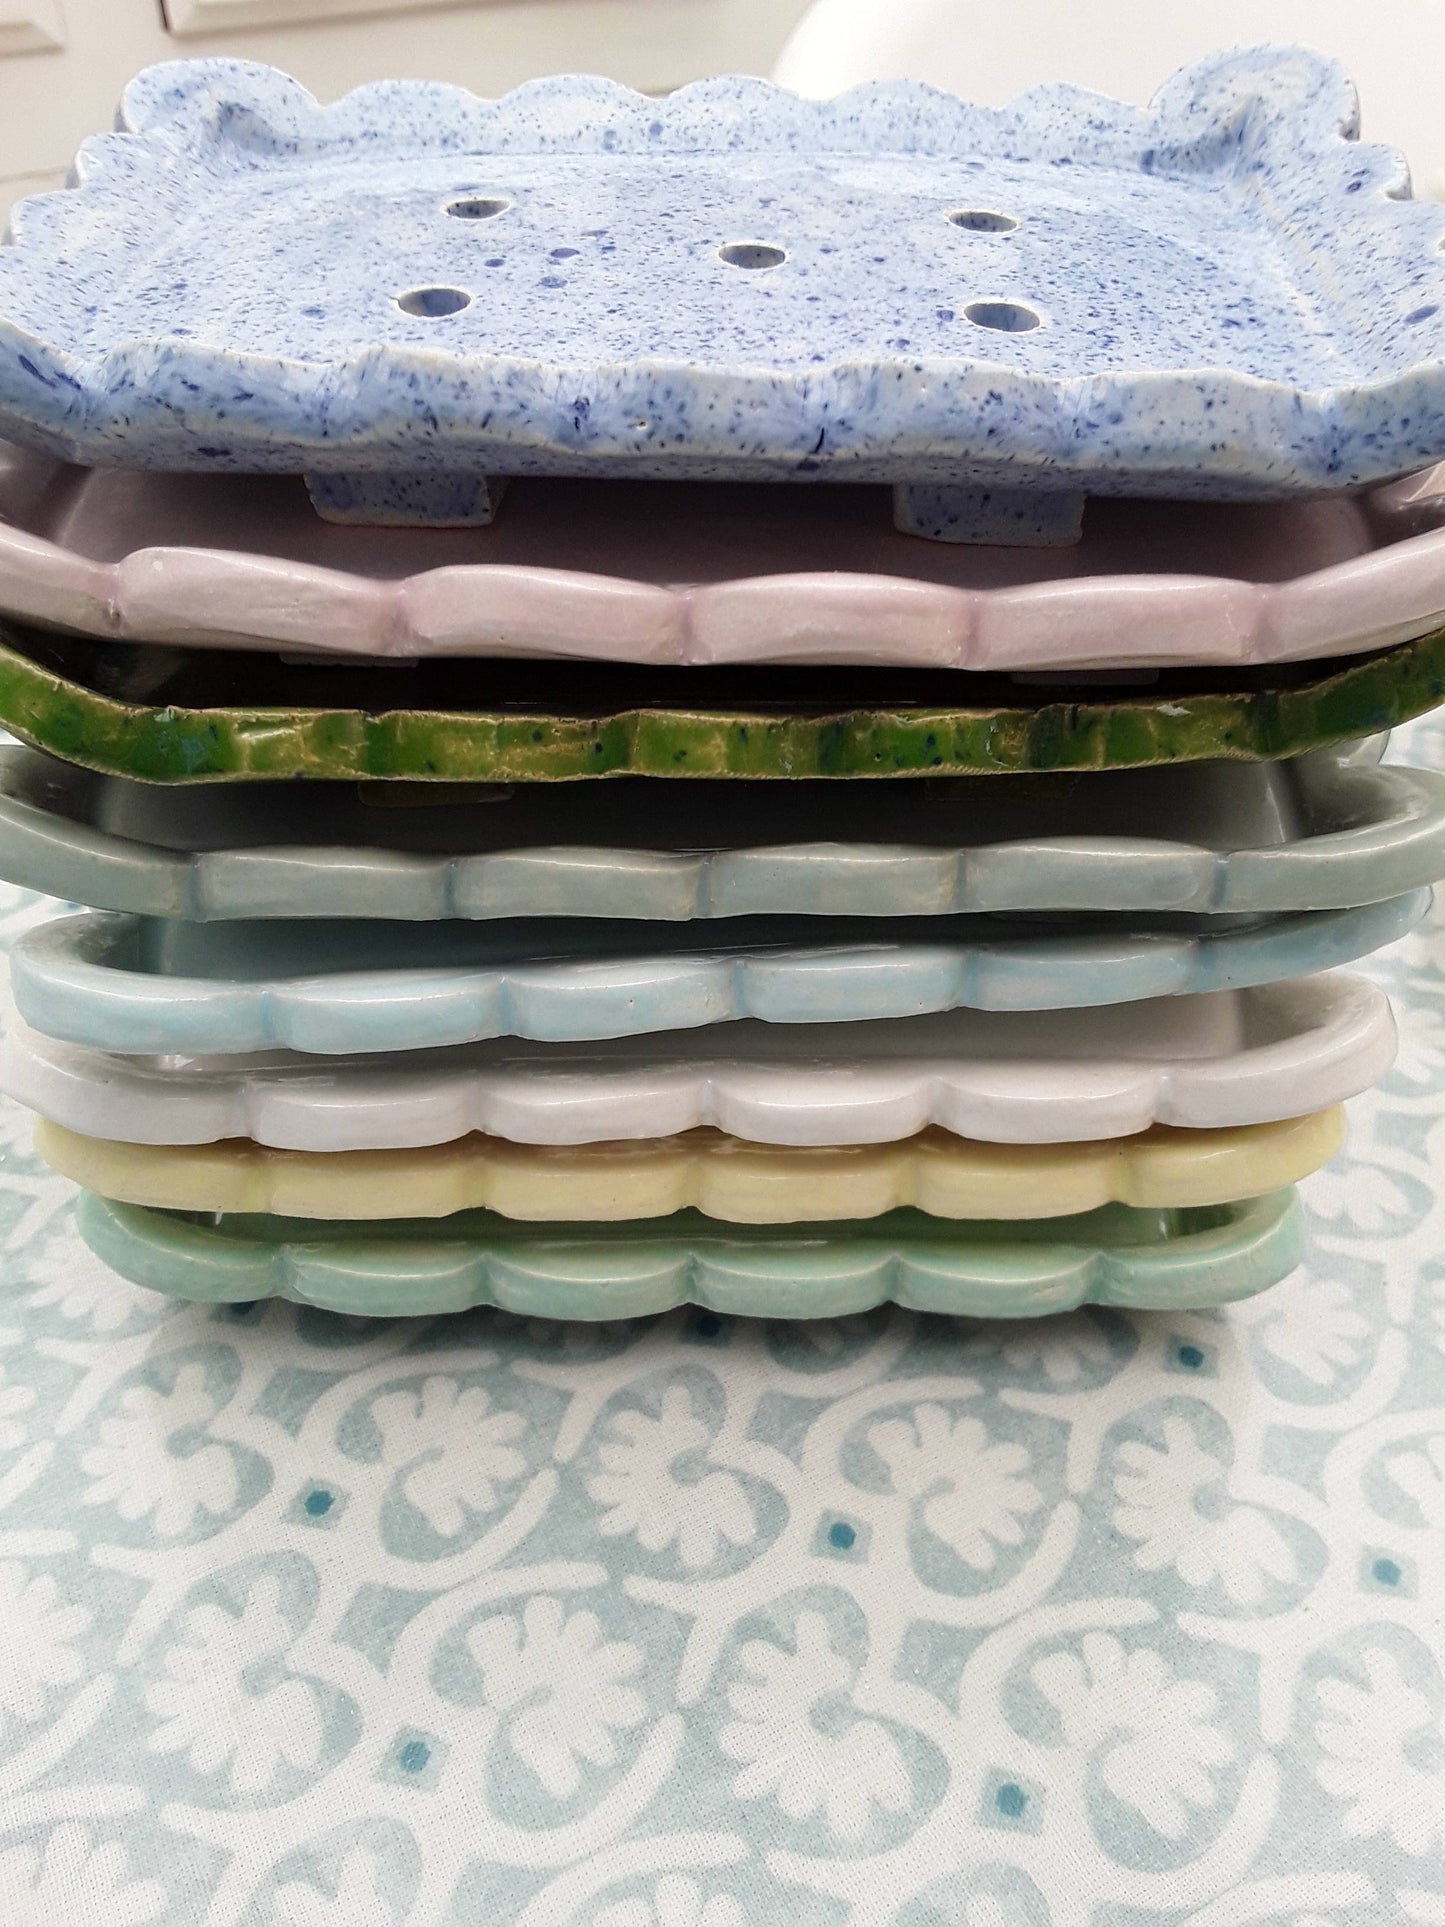 Sea Bramble Ceramics - Handmade Large soap dishes with scalloped edge showing holes and feet for drainage